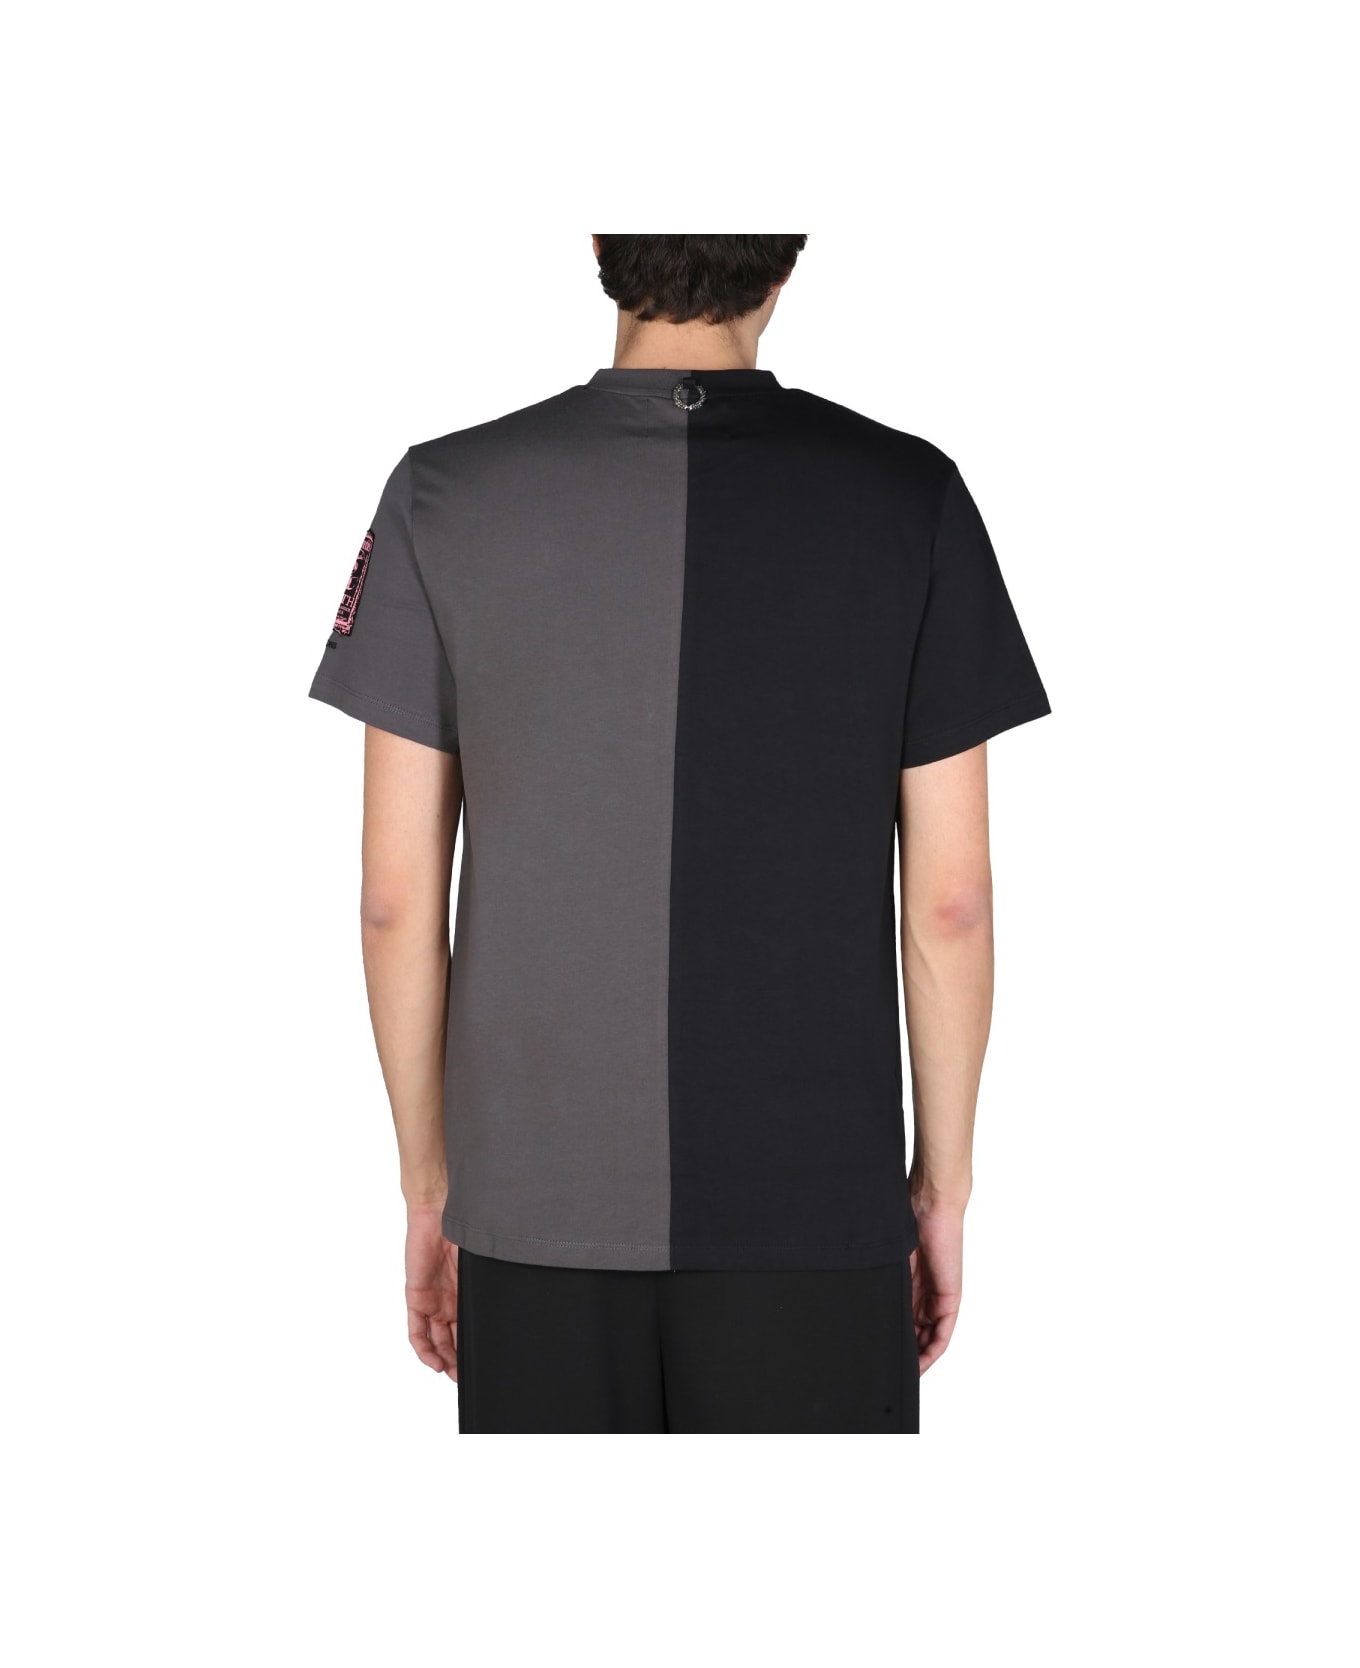 Fred Perry by Raf Simons Crewneck T-shirt - GREY